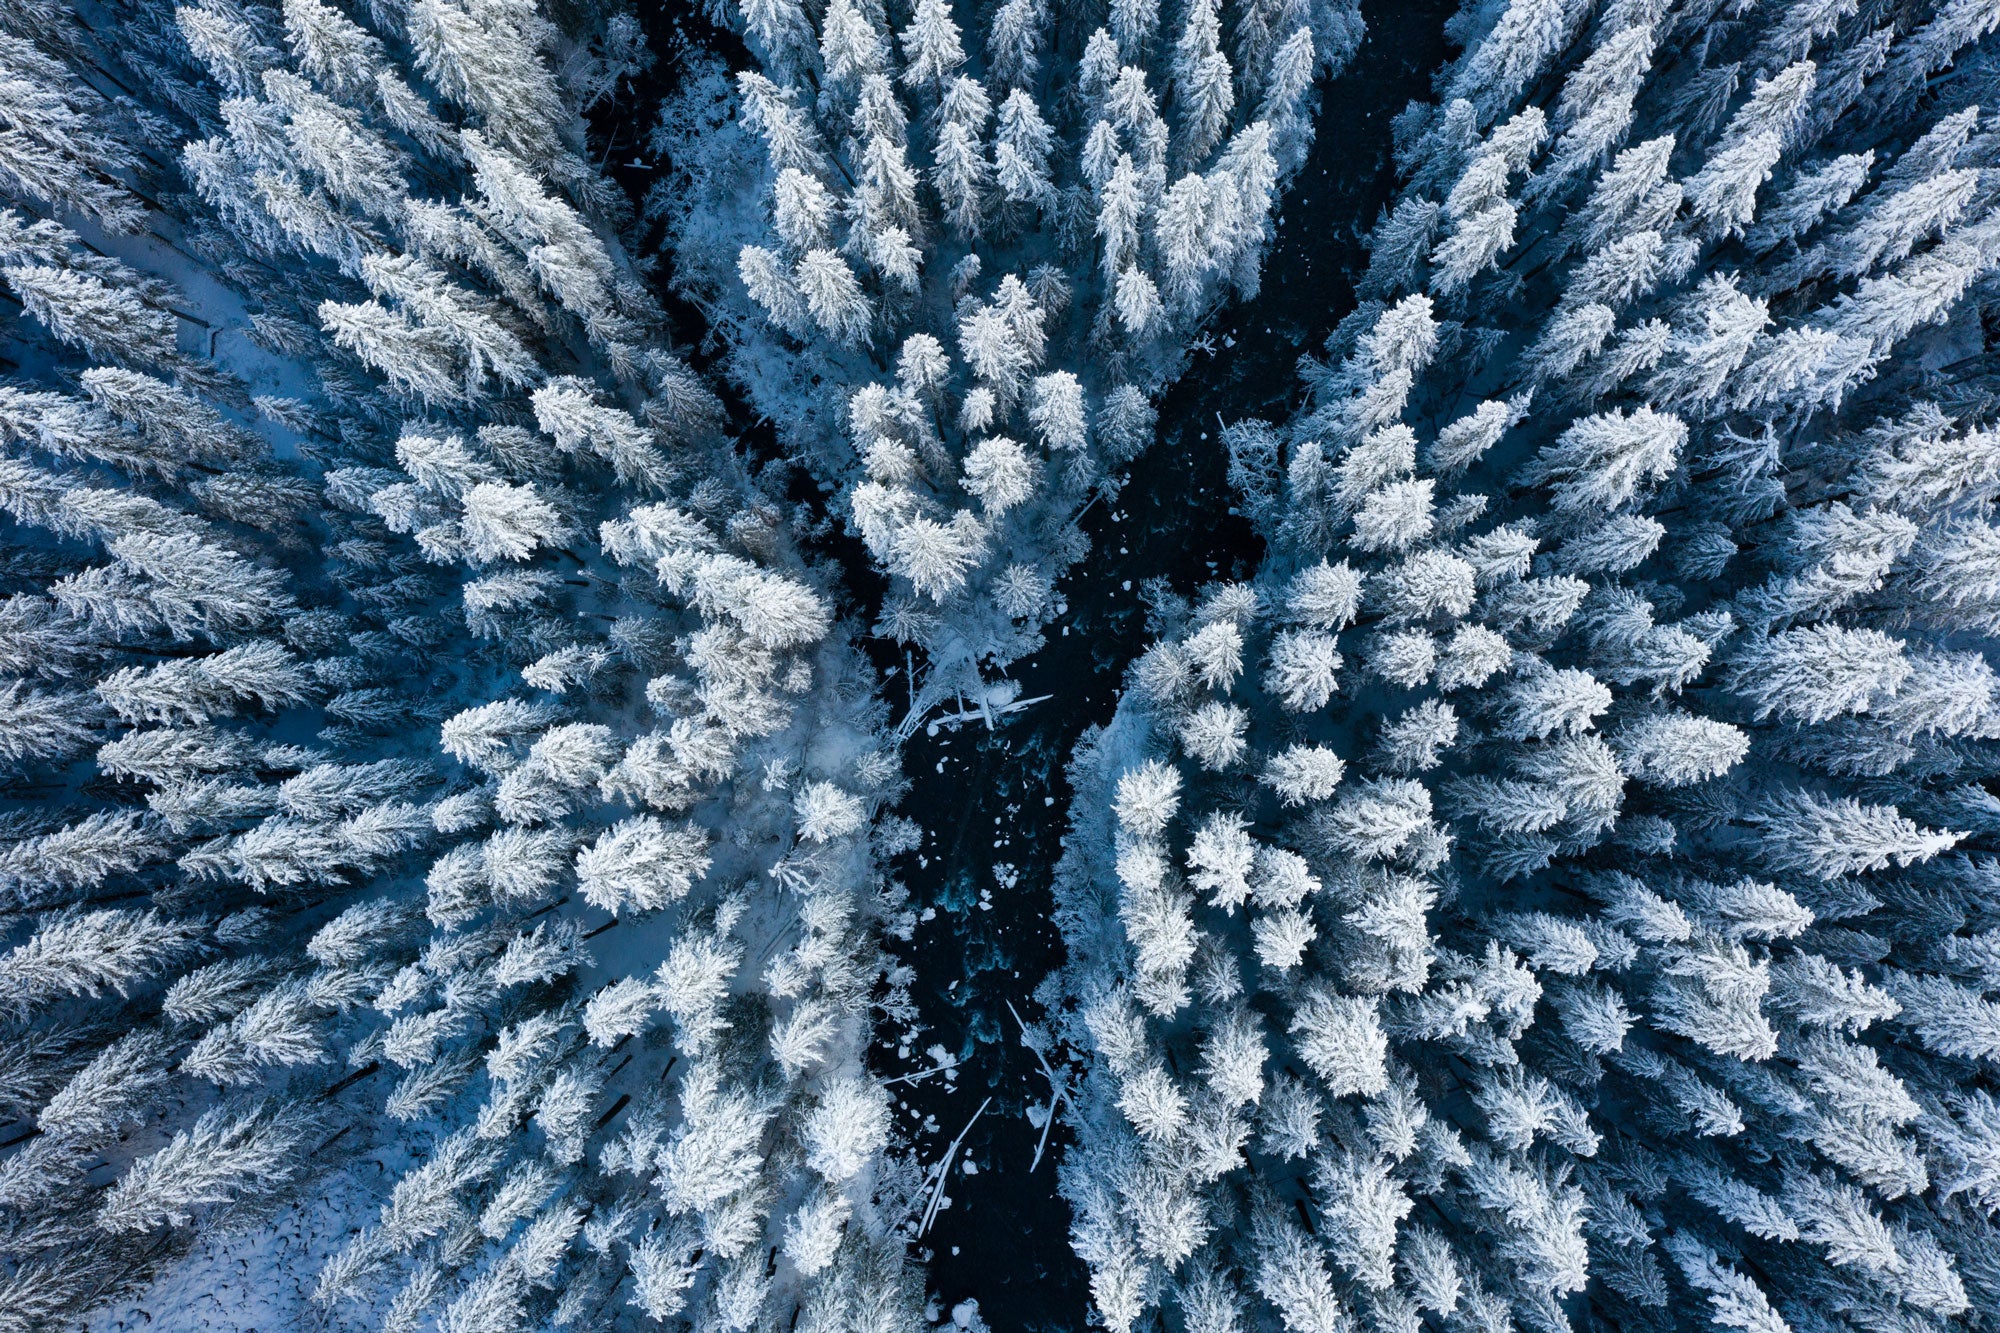 A drone shot looking directly downwards on a snowy pine forest